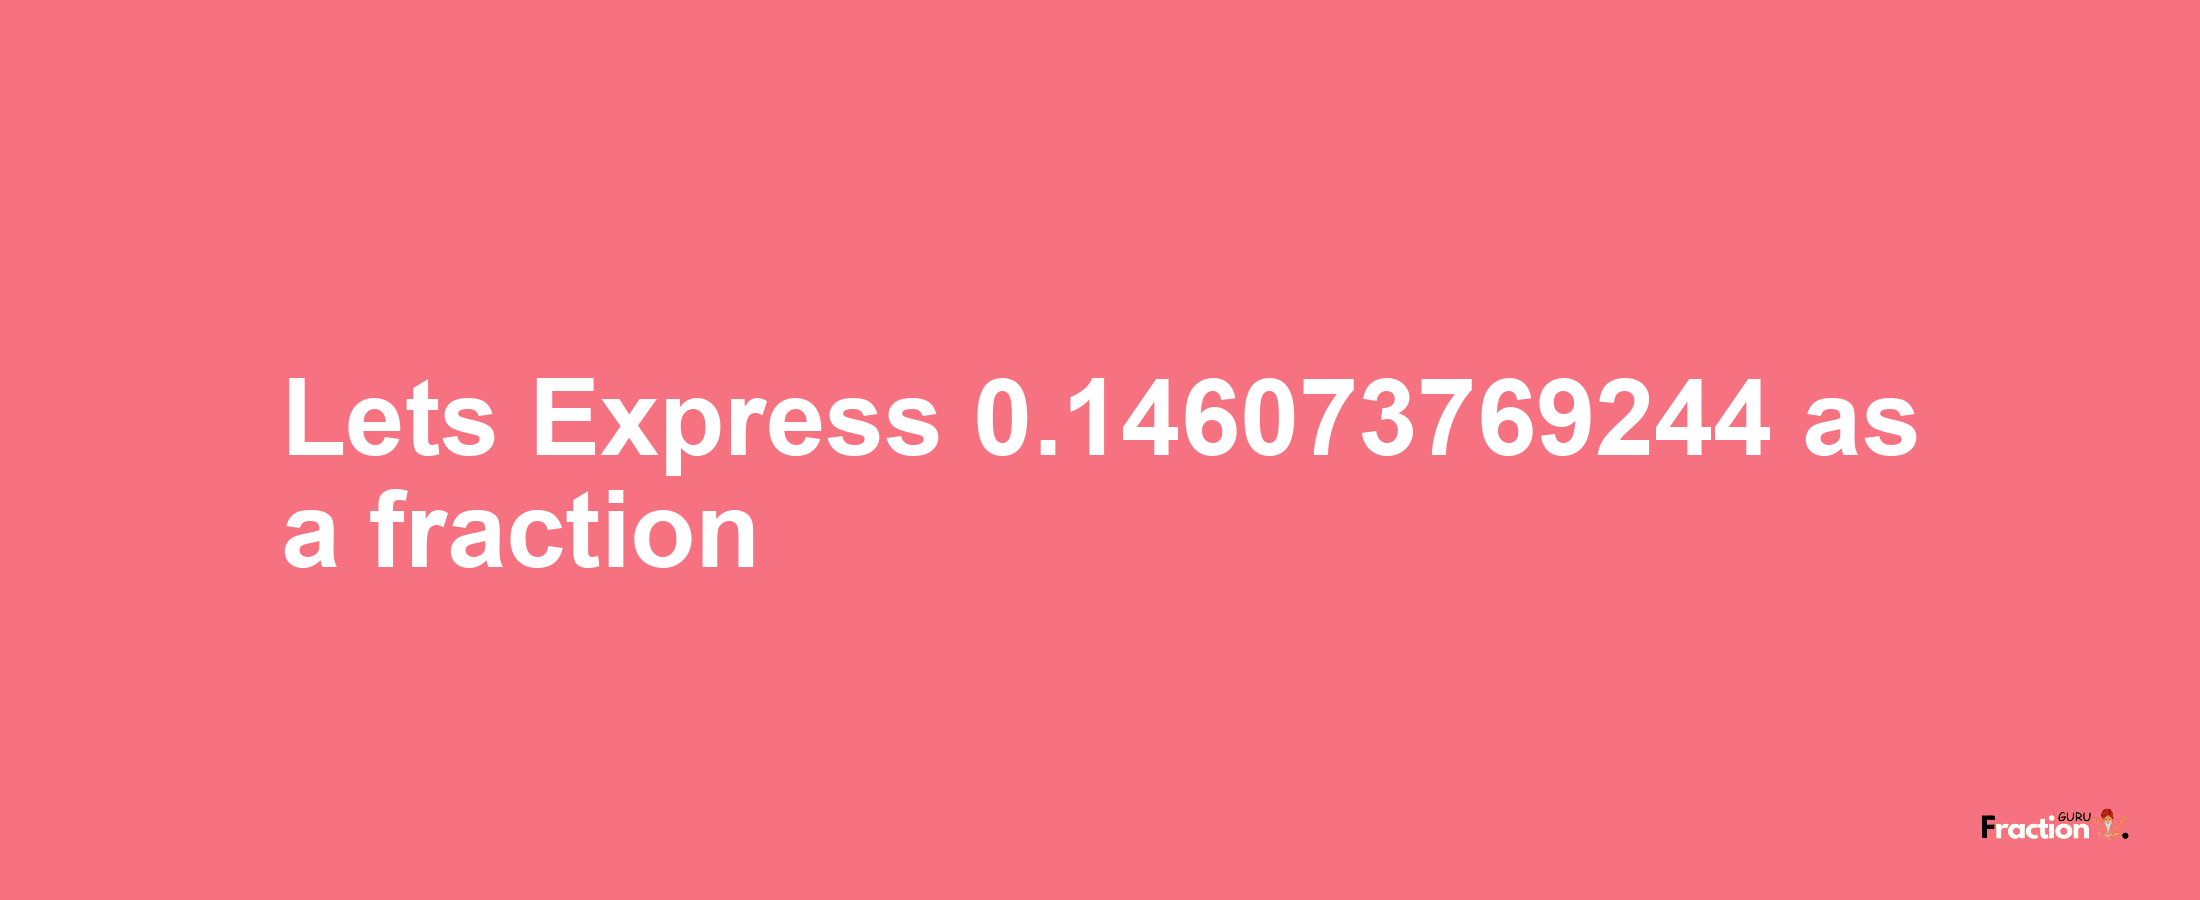 Lets Express 0.146073769244 as afraction